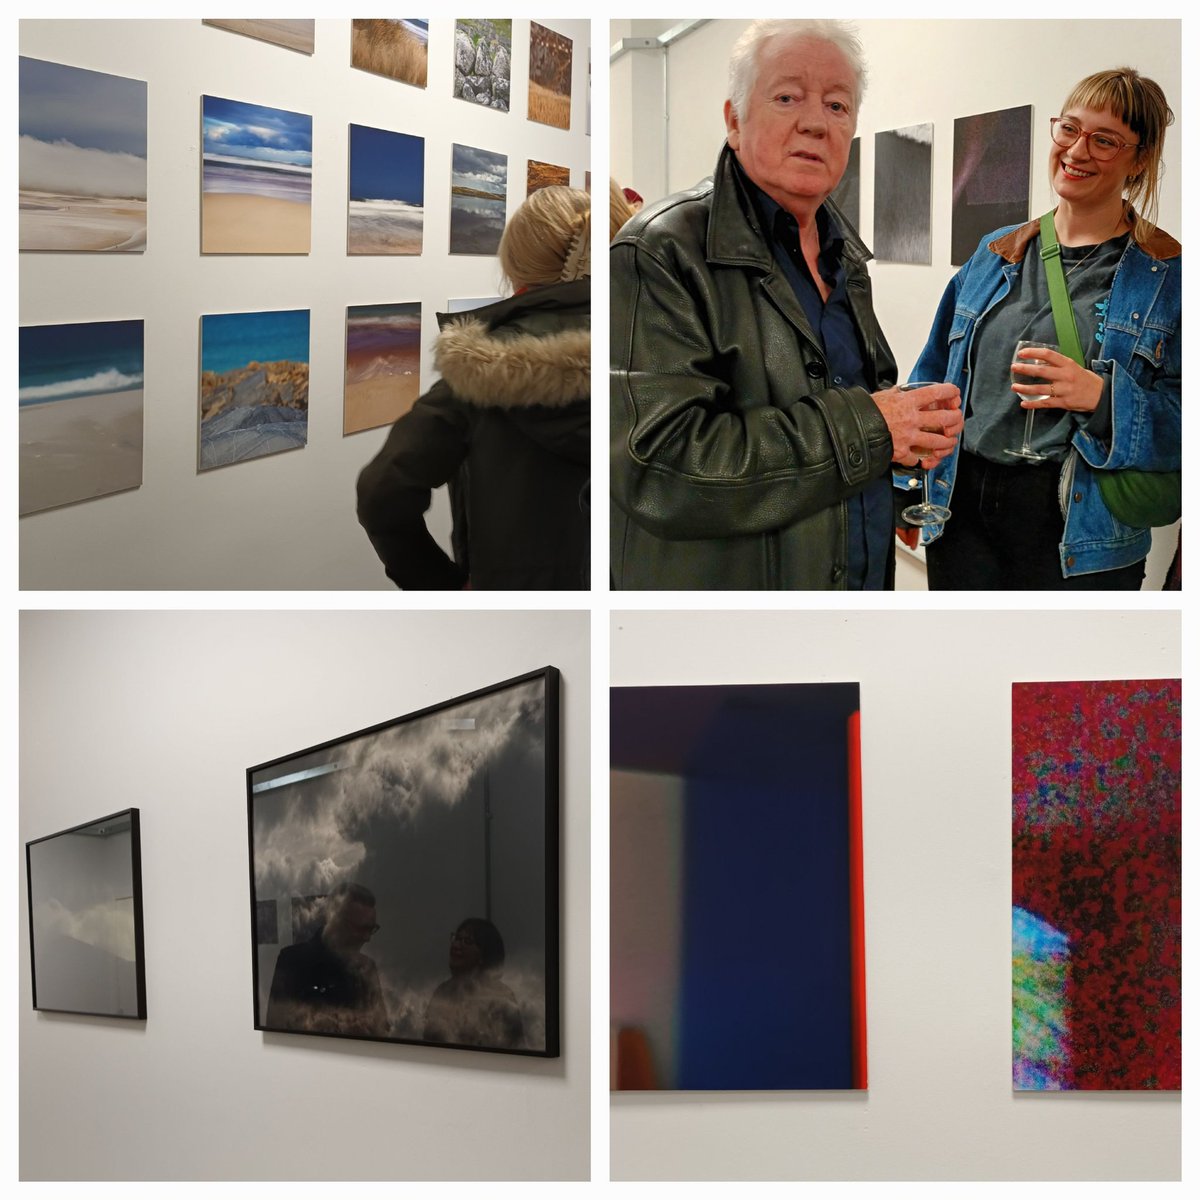 All my faves are here @sogo_mag for 'To see is to forget the name of the thing one sees' ☆ 5 perspectives☆ @waspsstudios @McfieBrian @garterart @foreigncorr1 @perfectcircleuk @andybellimages ☆